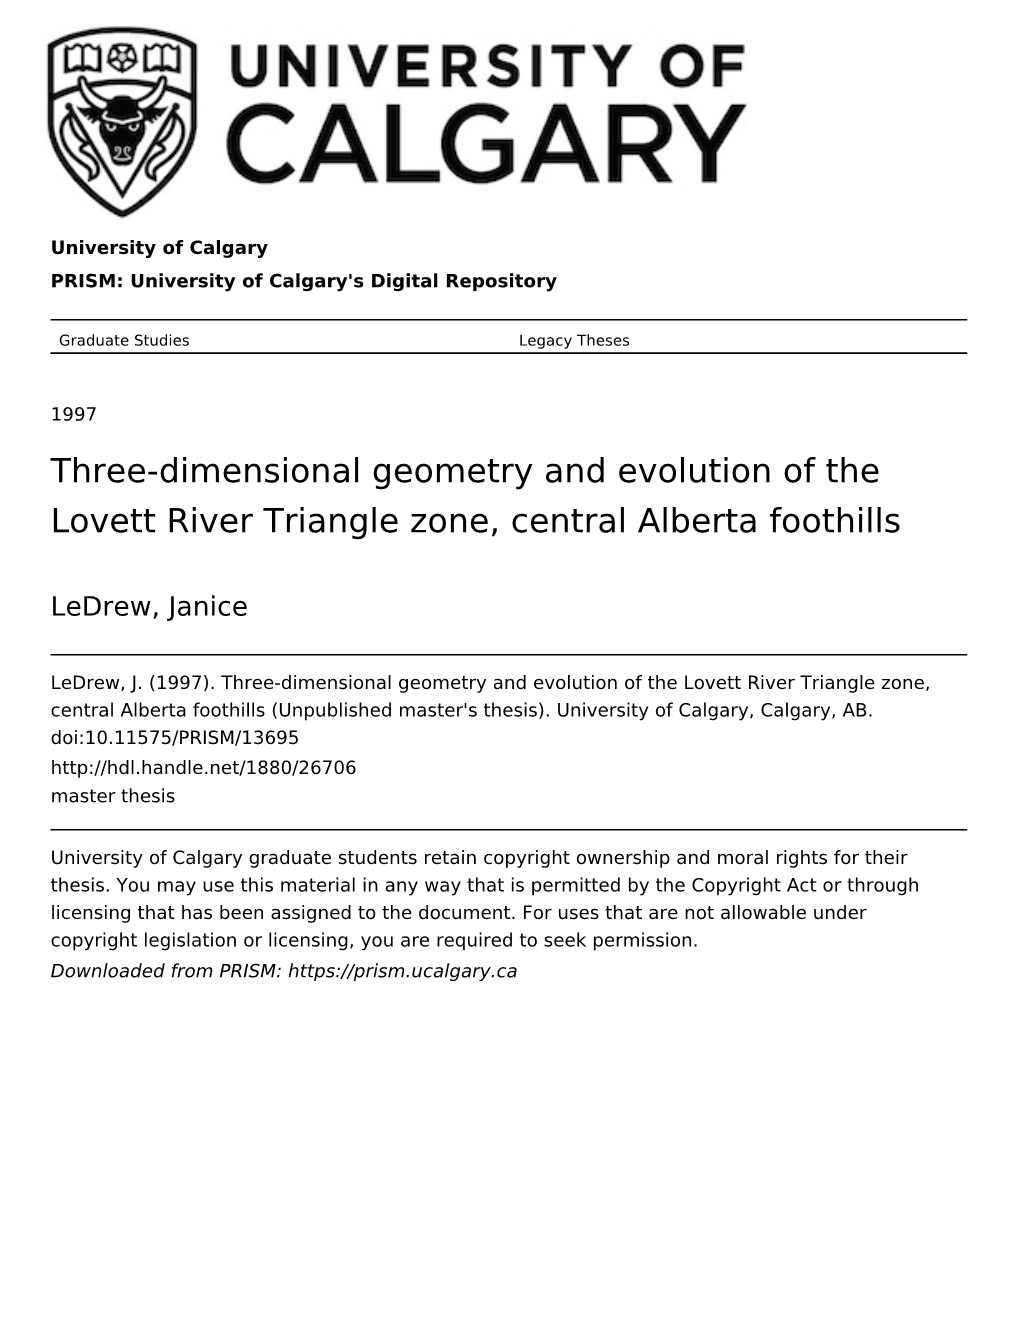 Three-Dimensional Geometry and Evolution of the Lovett River Triangle Zone, Central Alberta Foothills